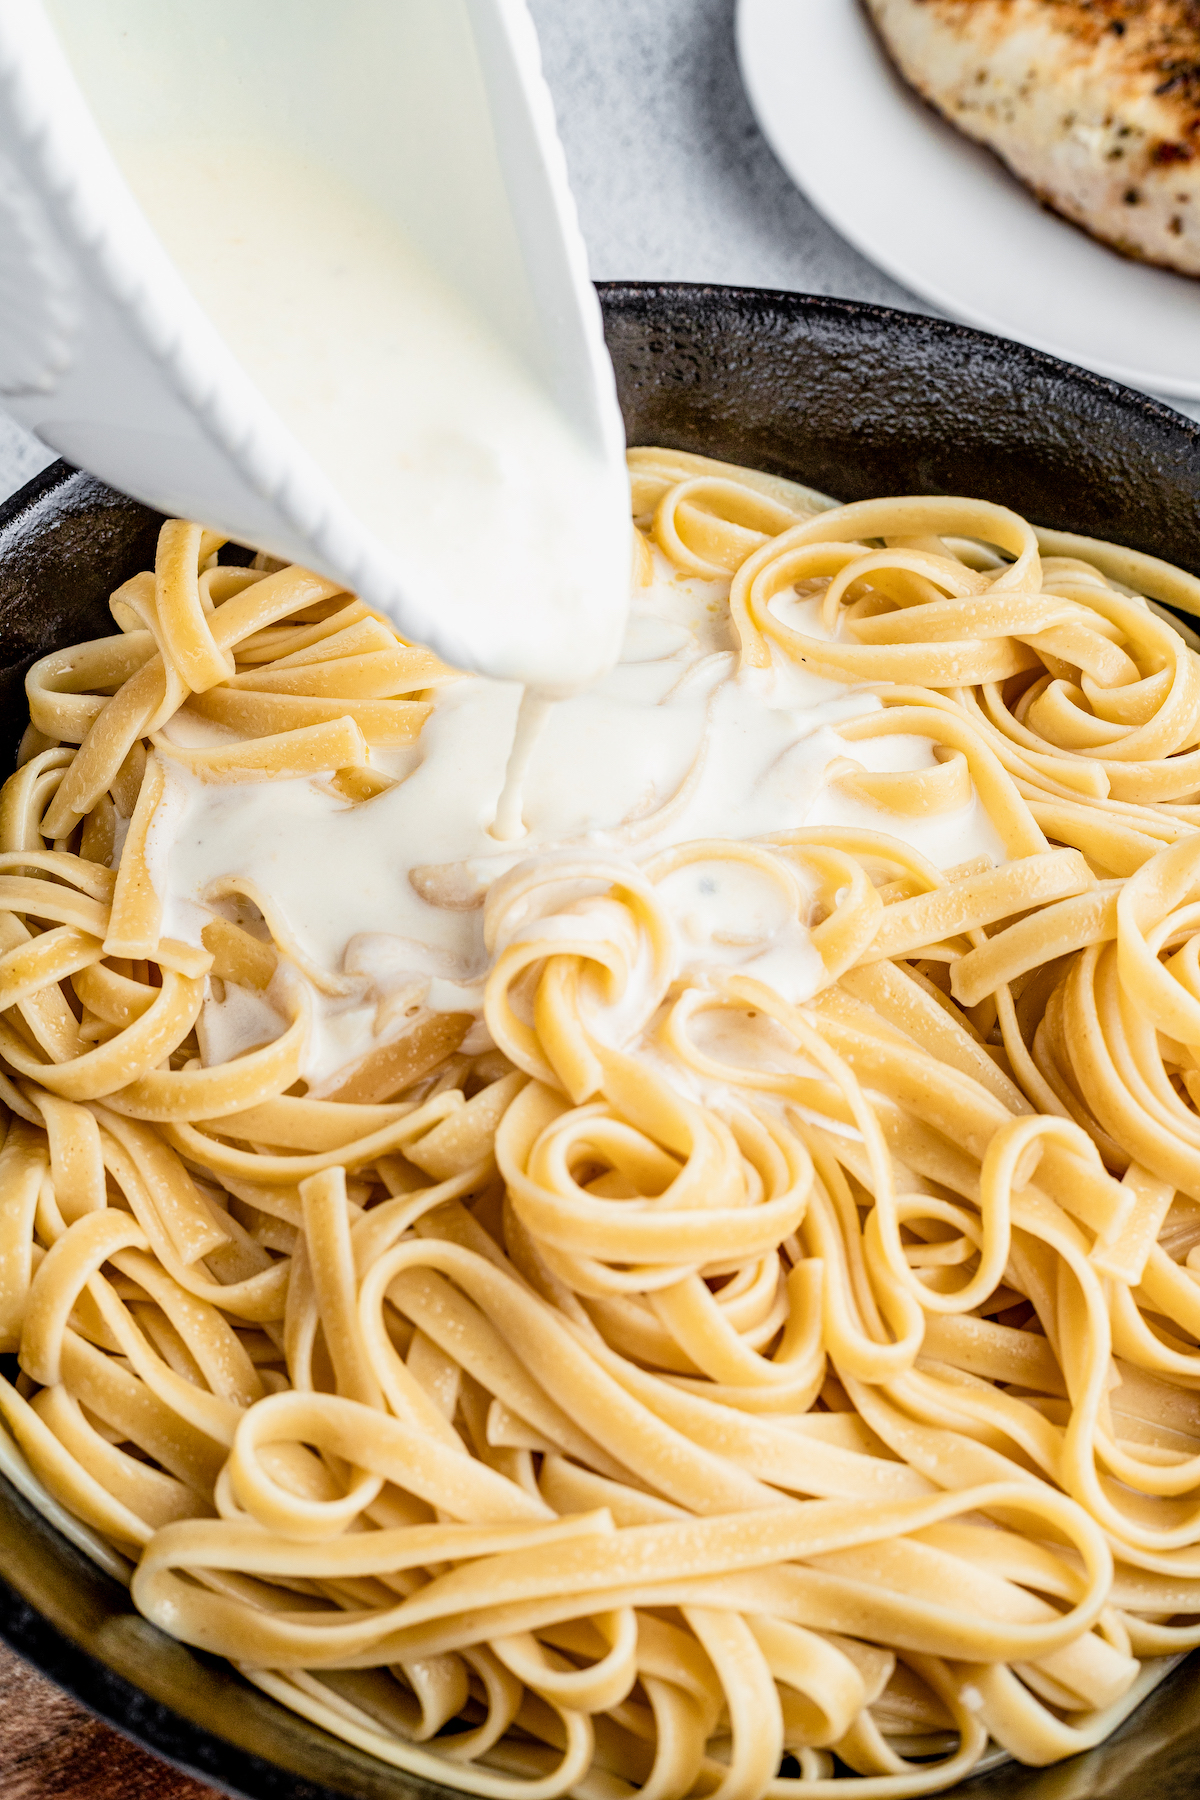 Creamy sauce being poured from a pitcher over a skillet full of cooked pasta.